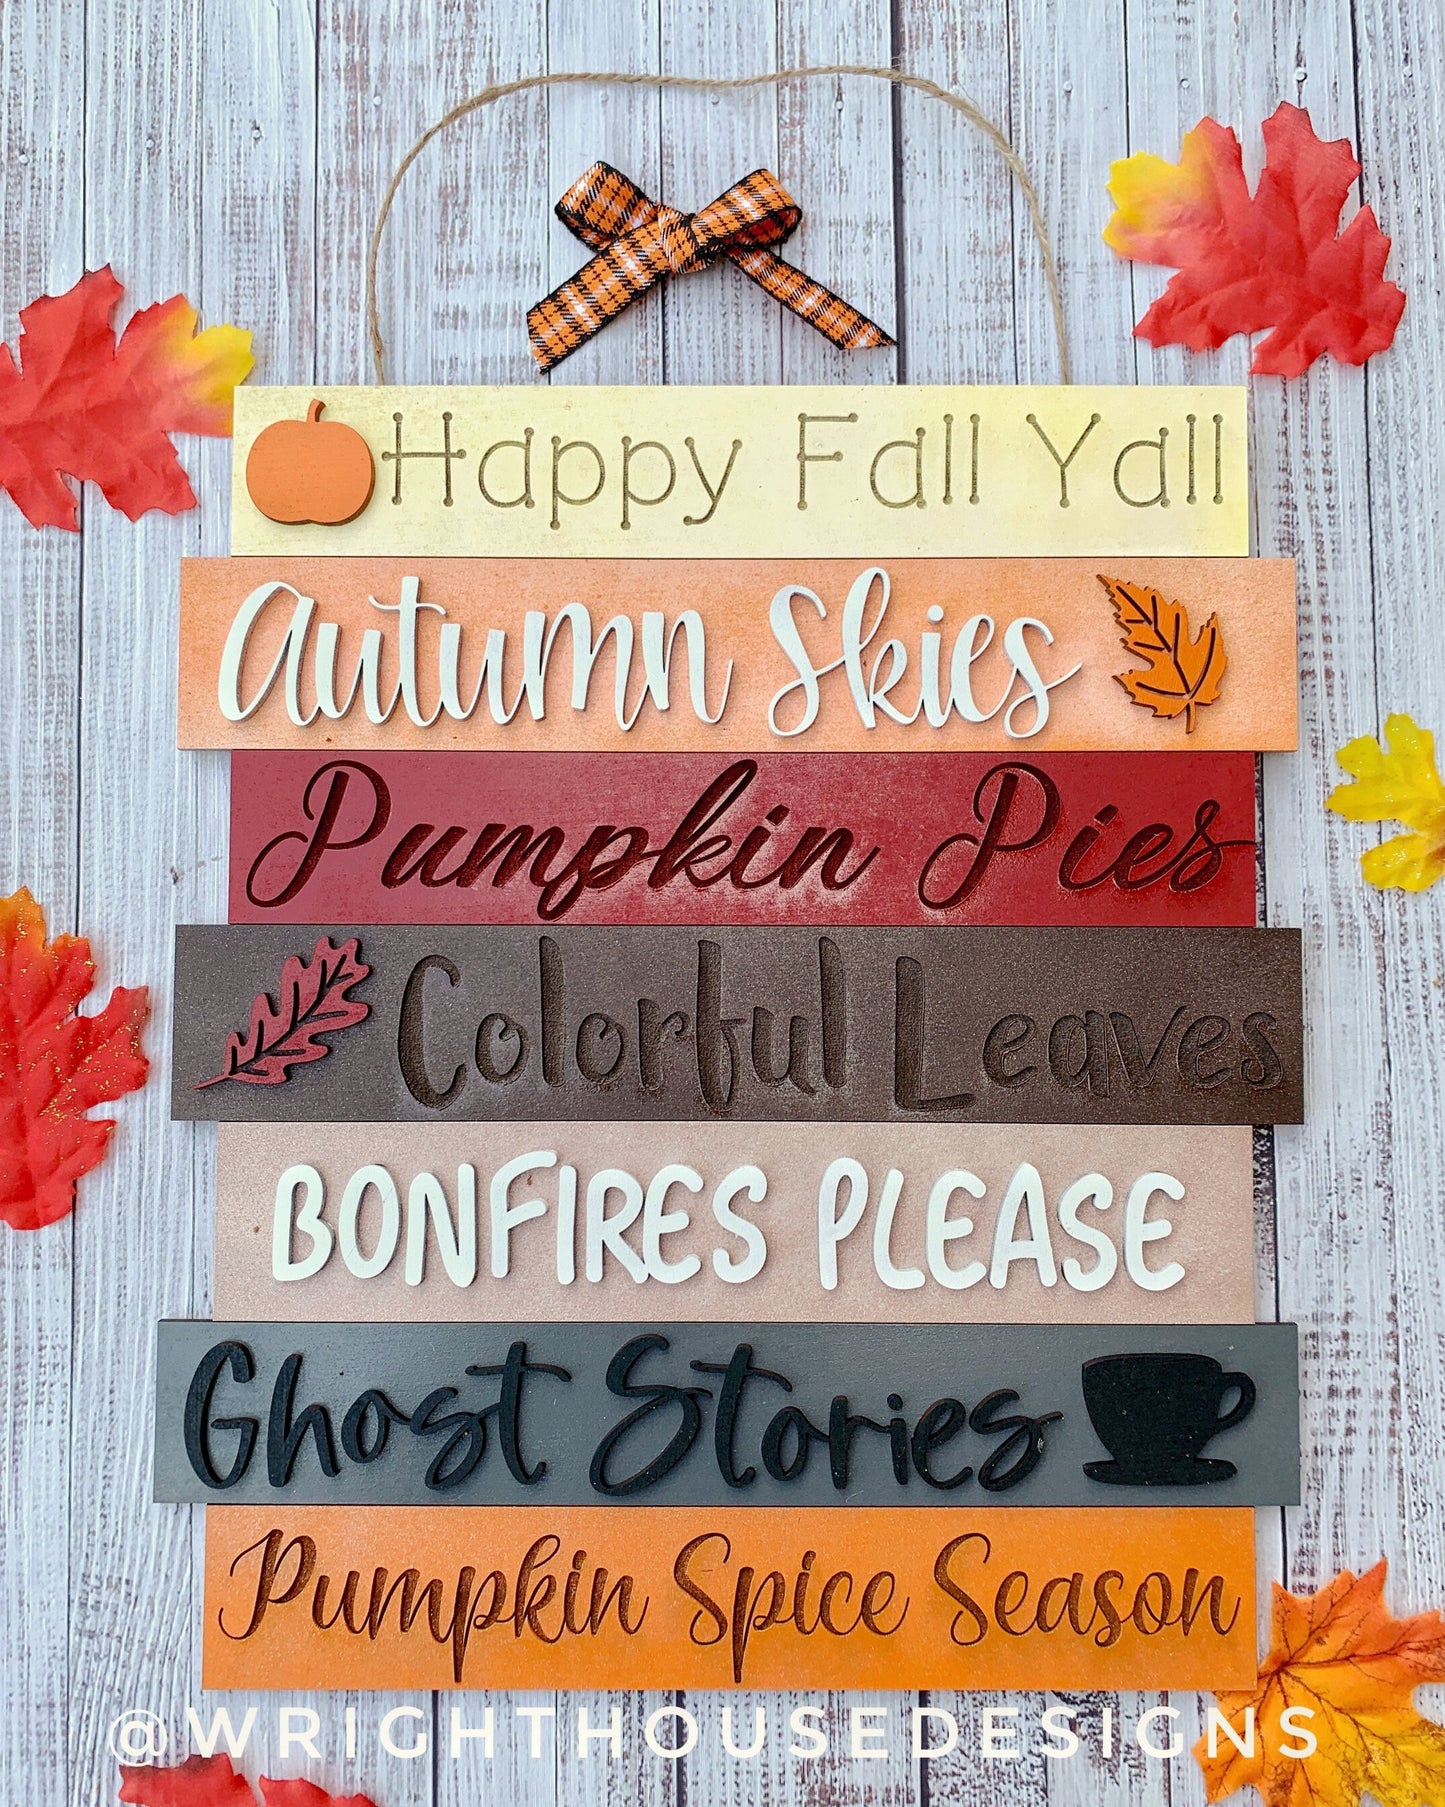 DIGITAL FILE - Happy Fall Yall - Autumn Bucket List Stacked Sign - Seasonal Diy Sign - Laser Cut SVG Files For Glowforge C02 Lasers